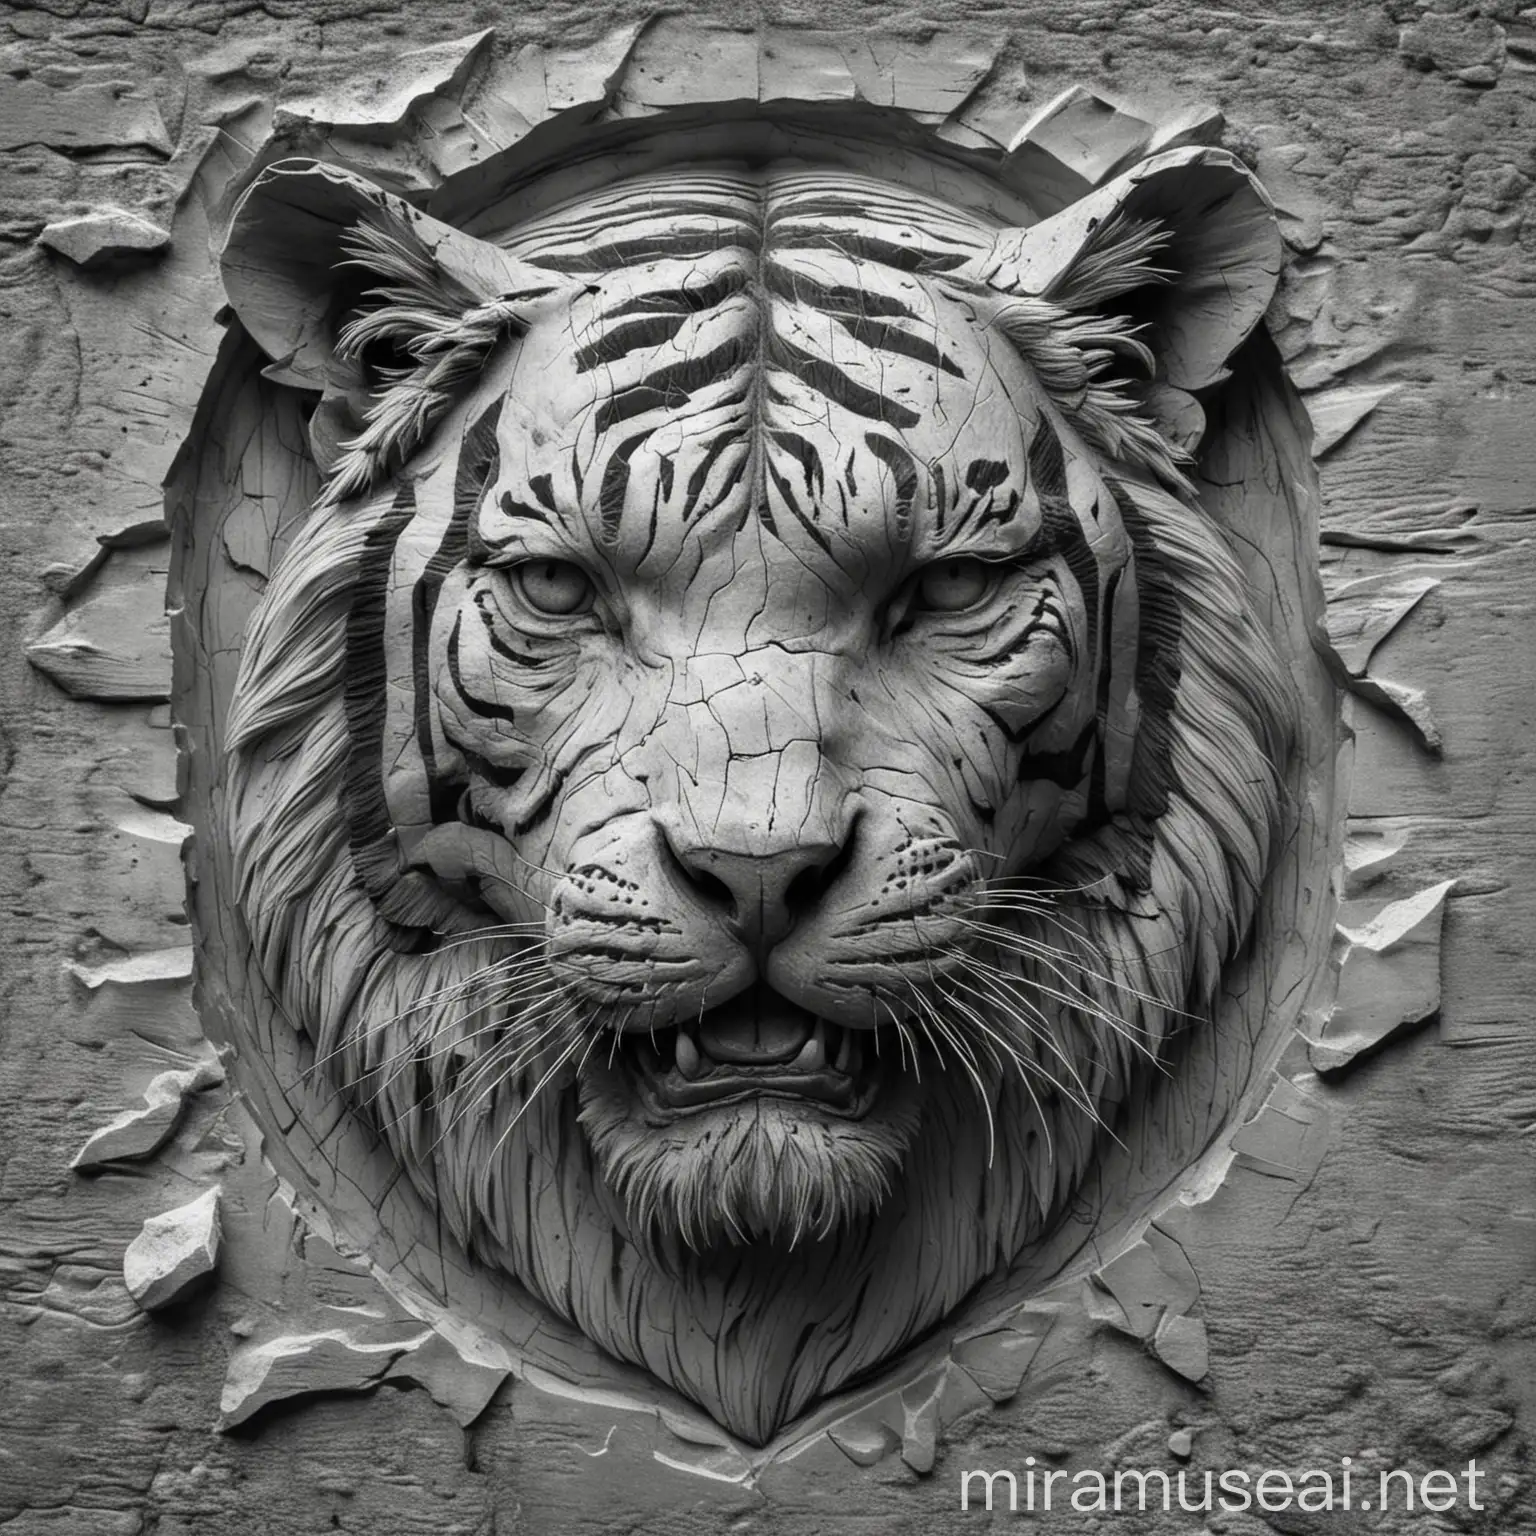 Majestic Grayscale Tiger in Bas Relief